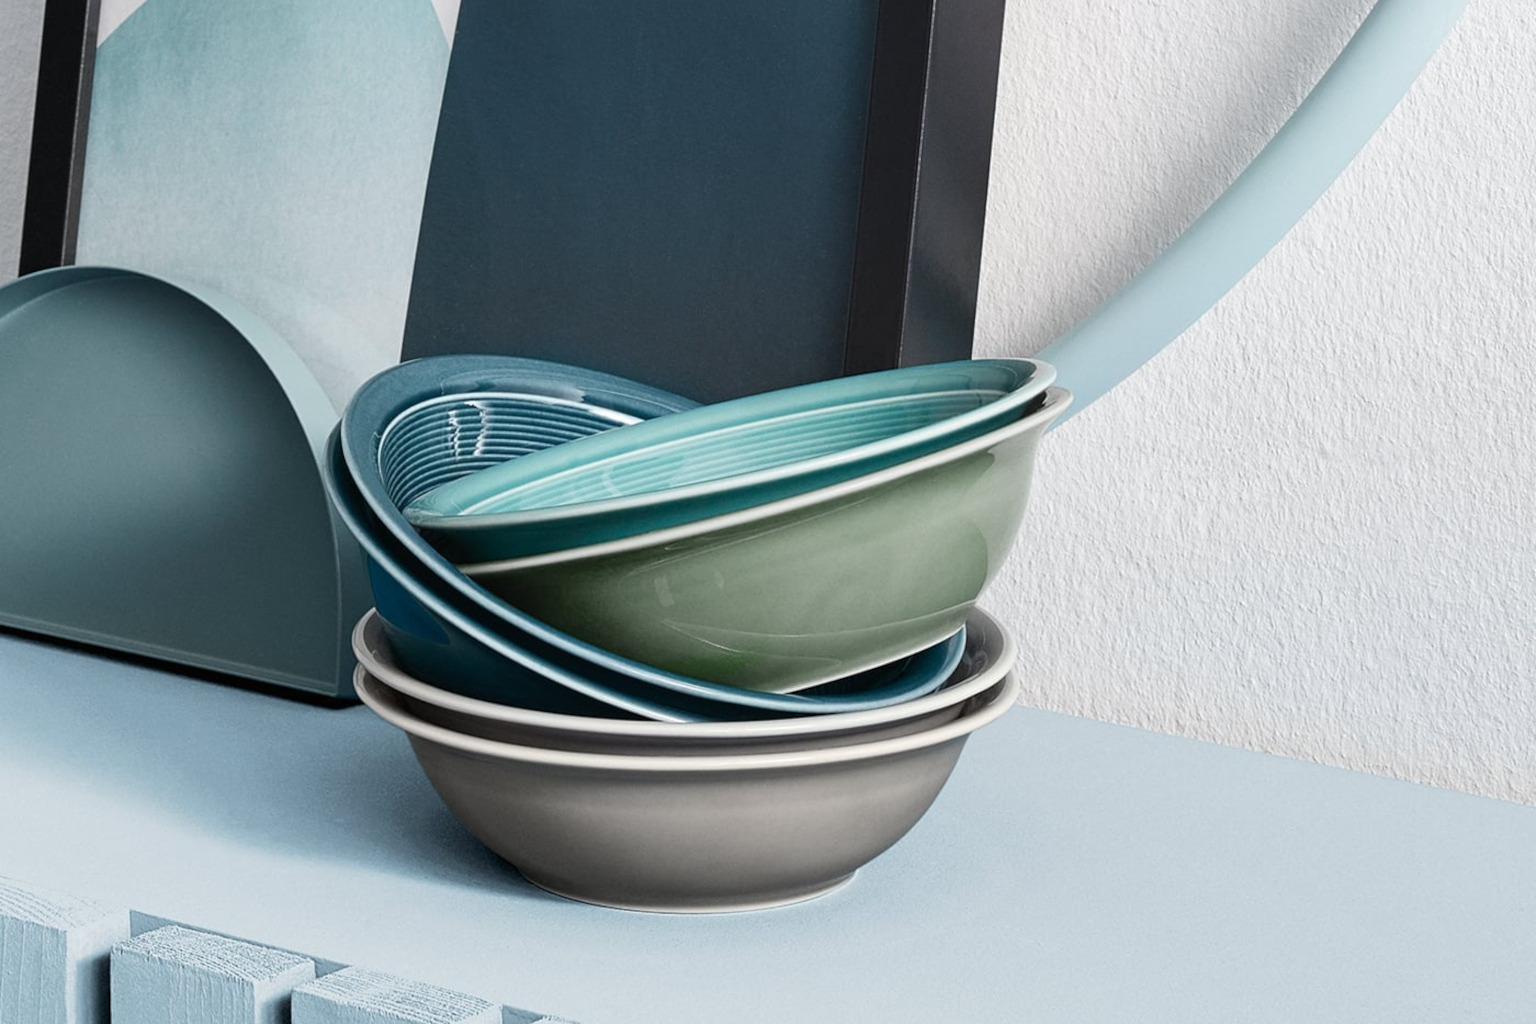 Thomas Trend Color deep bowls stacked stacked inside each other